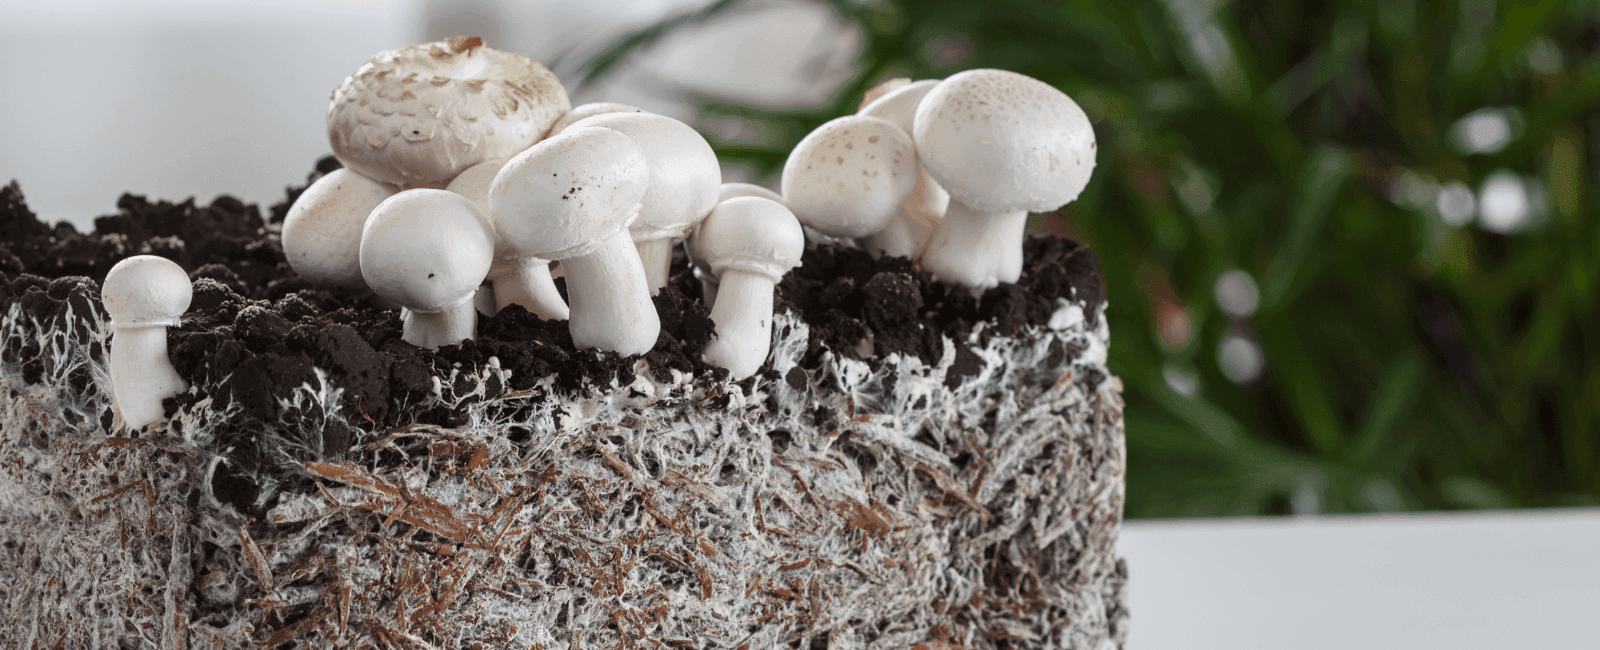 The Best Mushrooms to Start Growing at Home